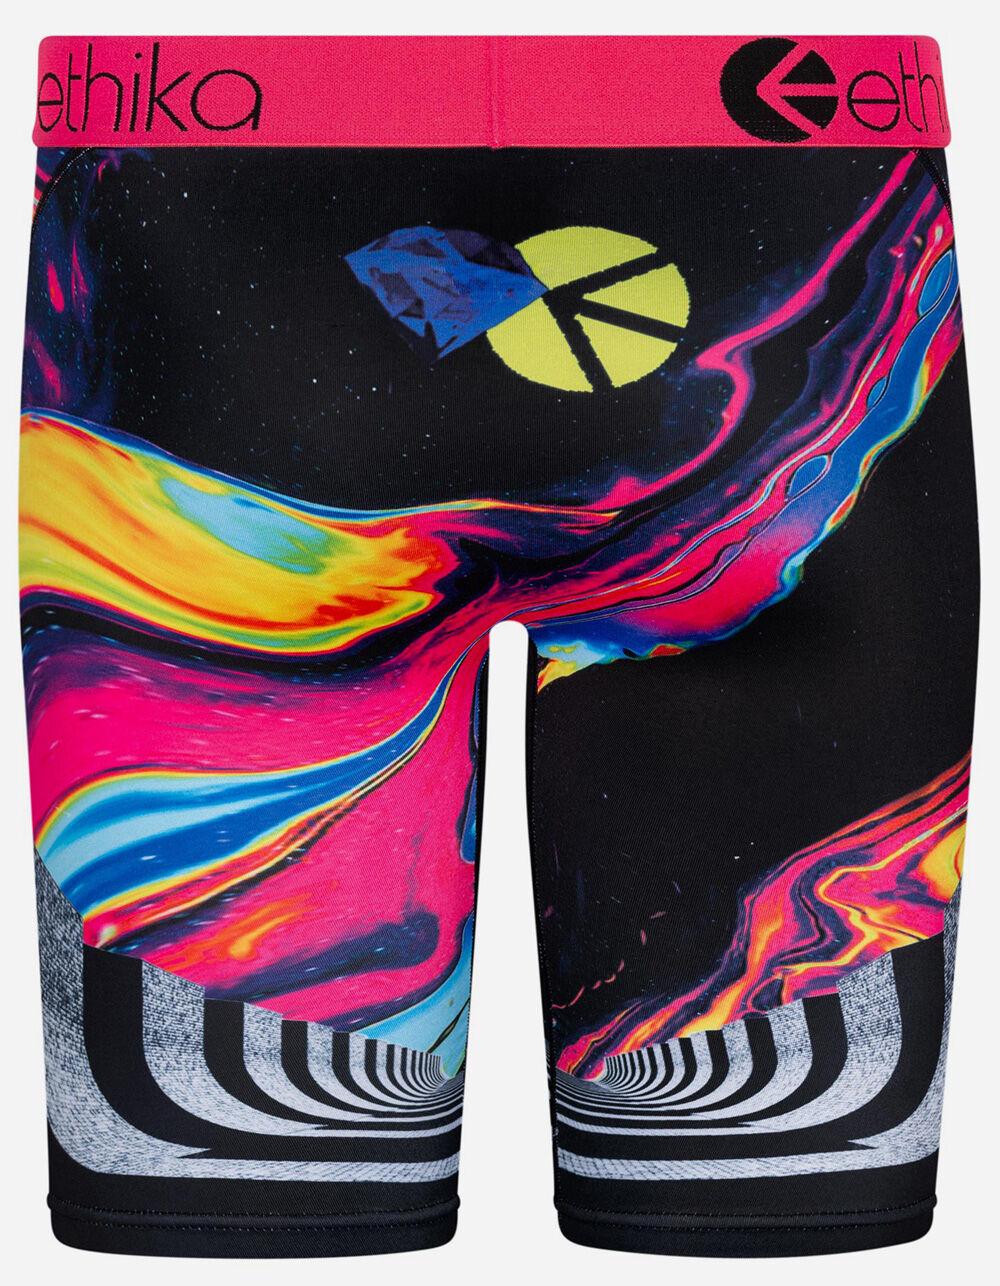 Ethika Space Bling Boxer Briefs